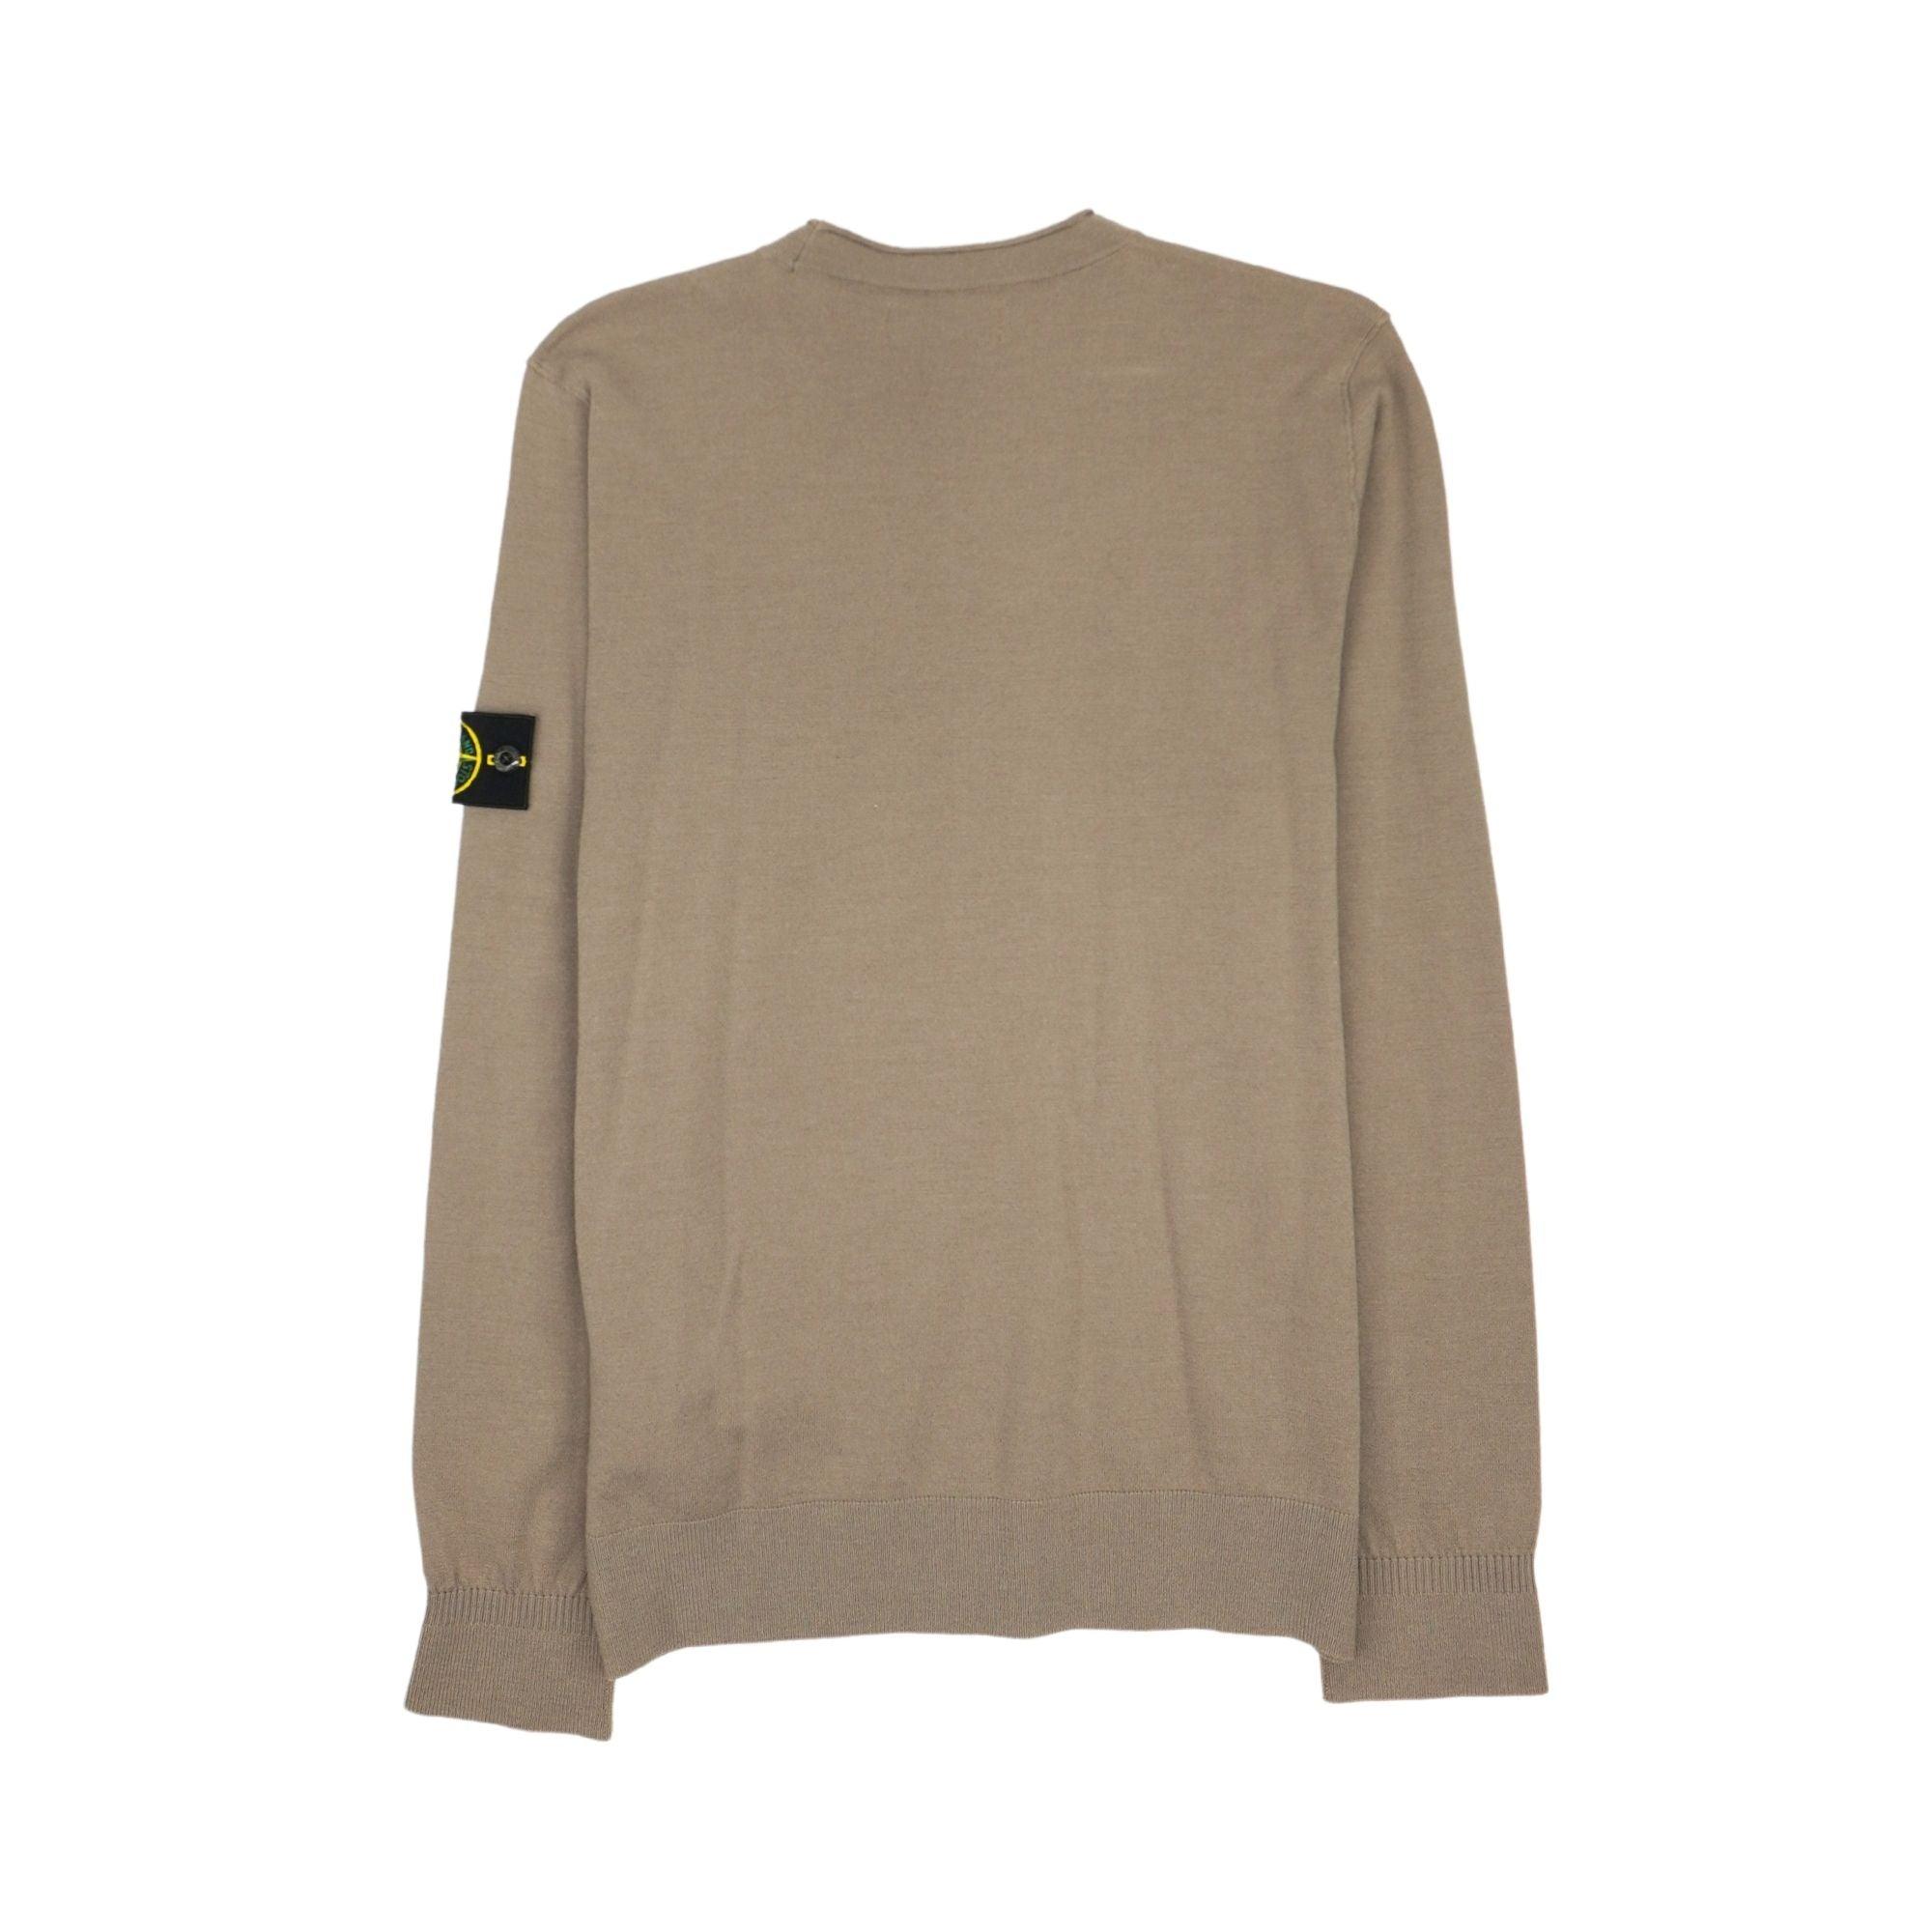 Stone Island Sweater - Men's L - Fashionably Yours